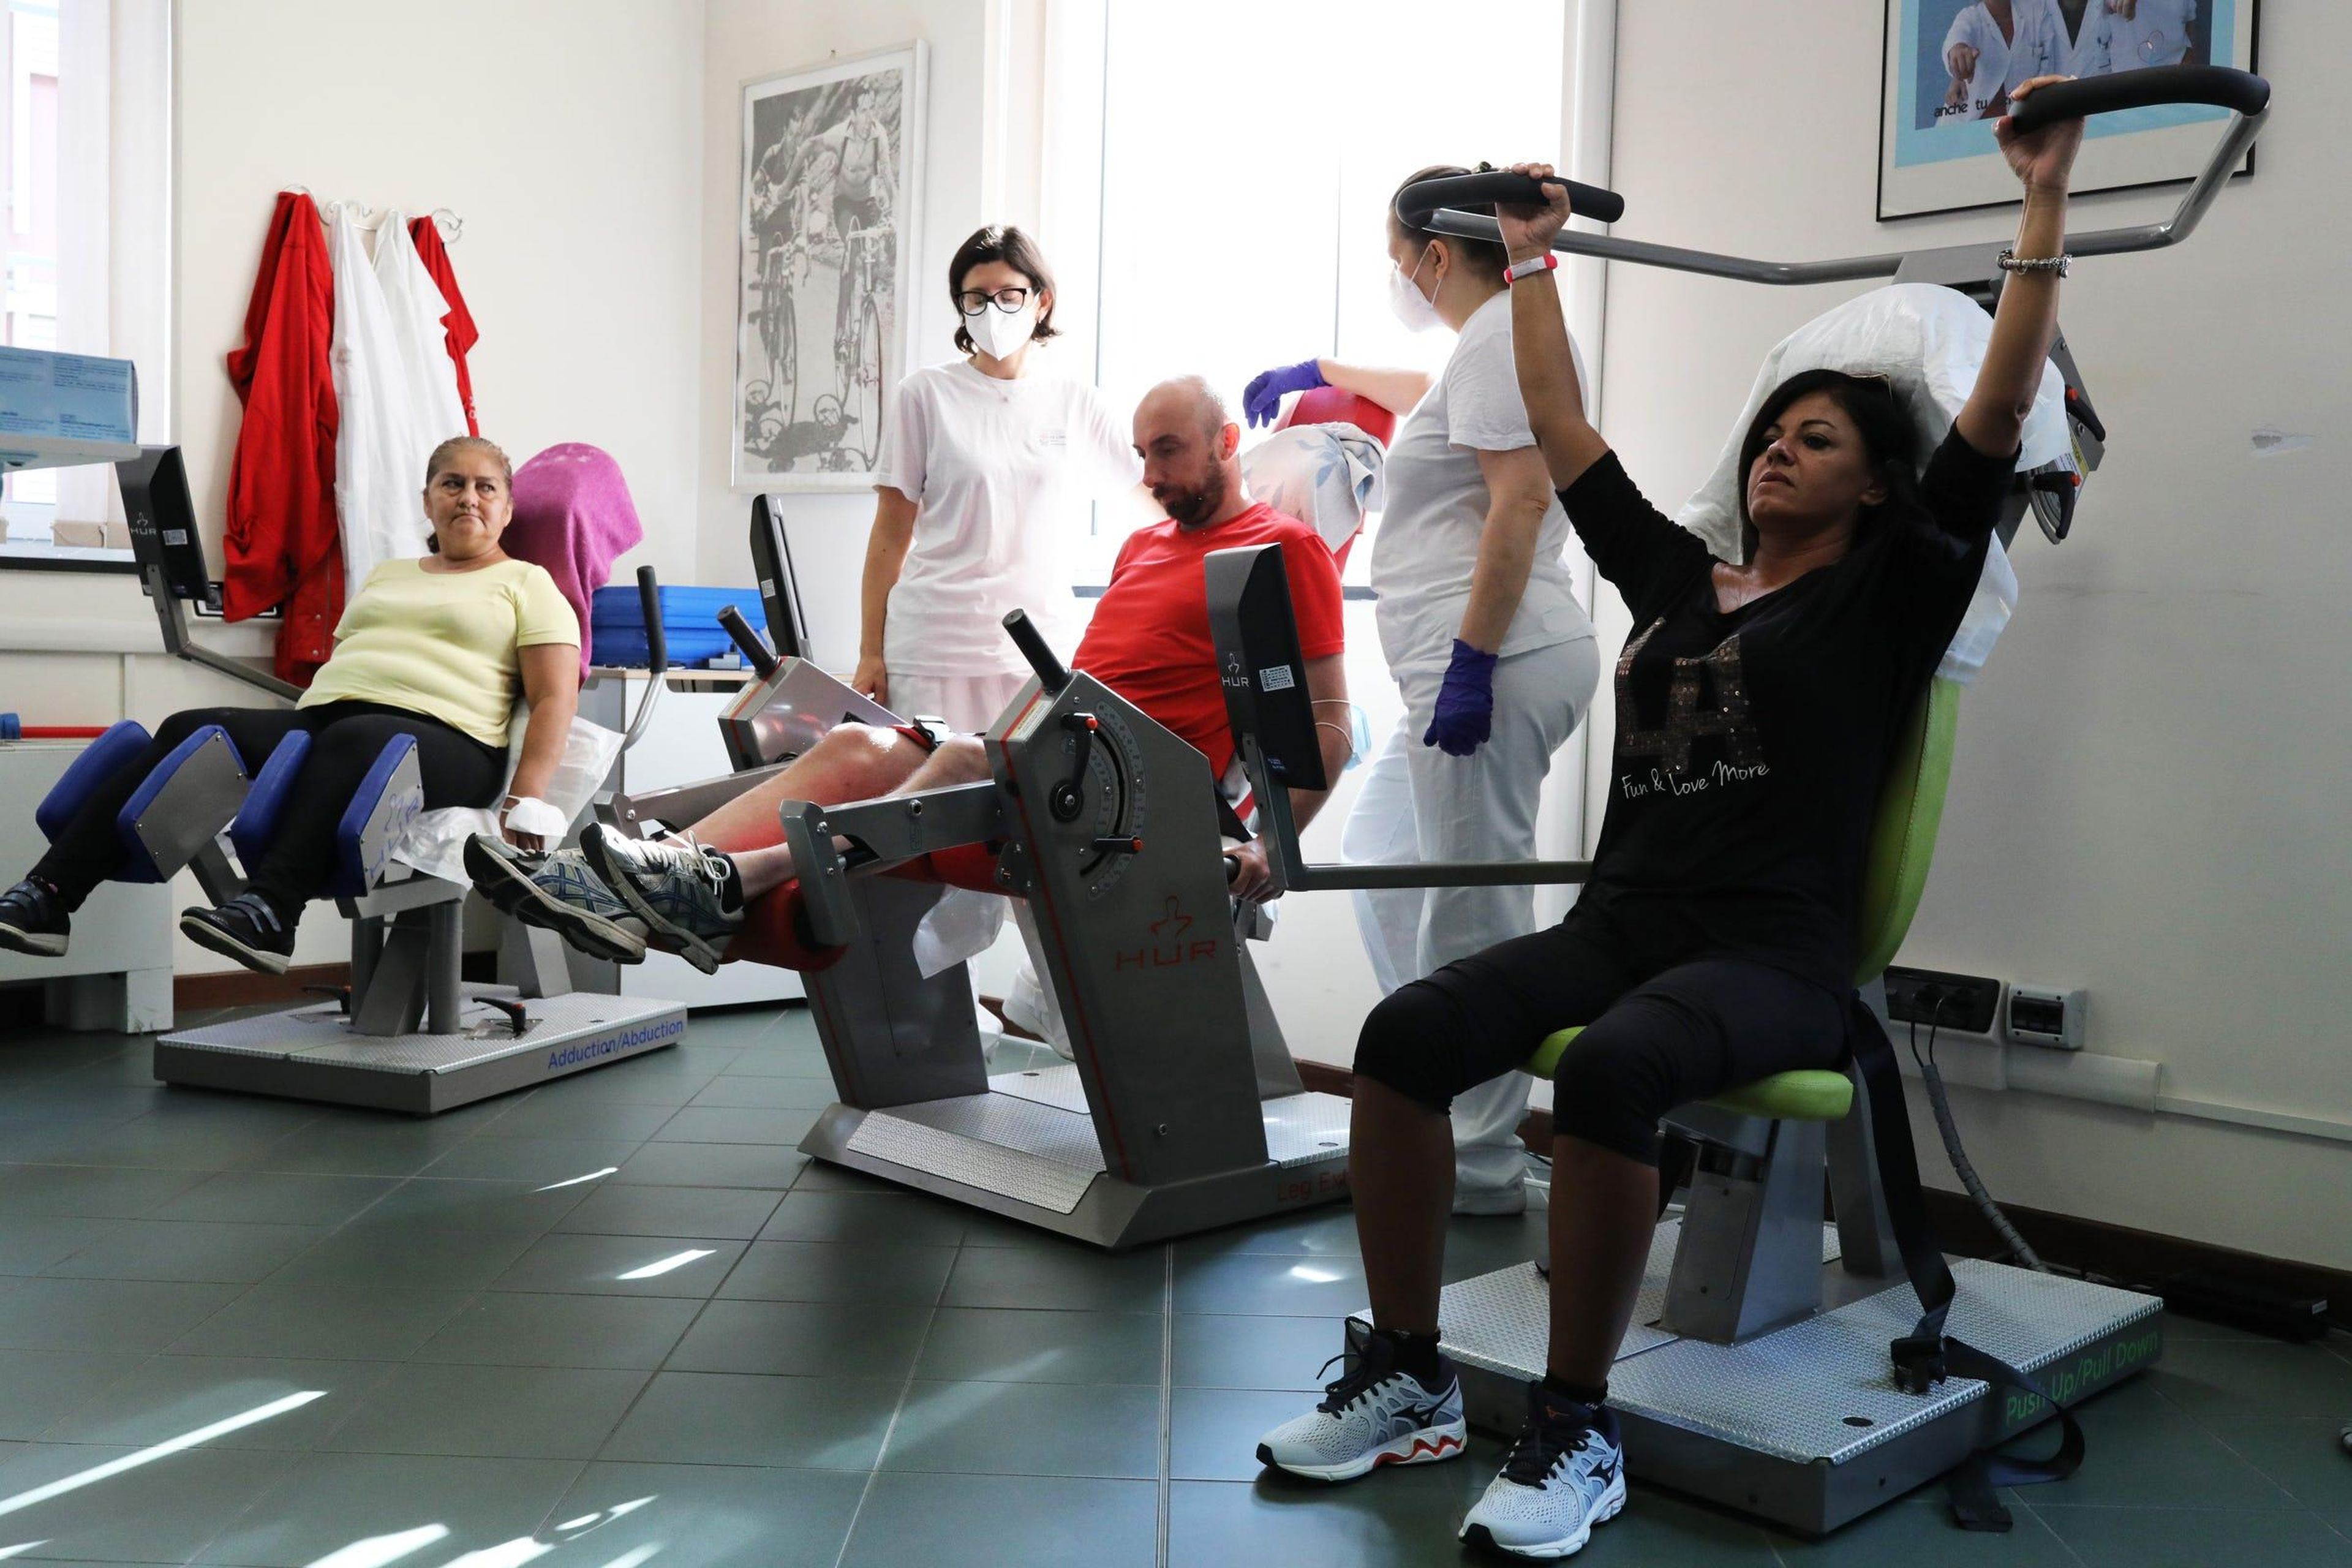 Recovering coronavirus patients train on a machine to strengthen muscle tone at the Department of Rehabilitative Cardiology in Genoa, Italy, on July 22, 2020. Marco Di Lauro/Getty Images